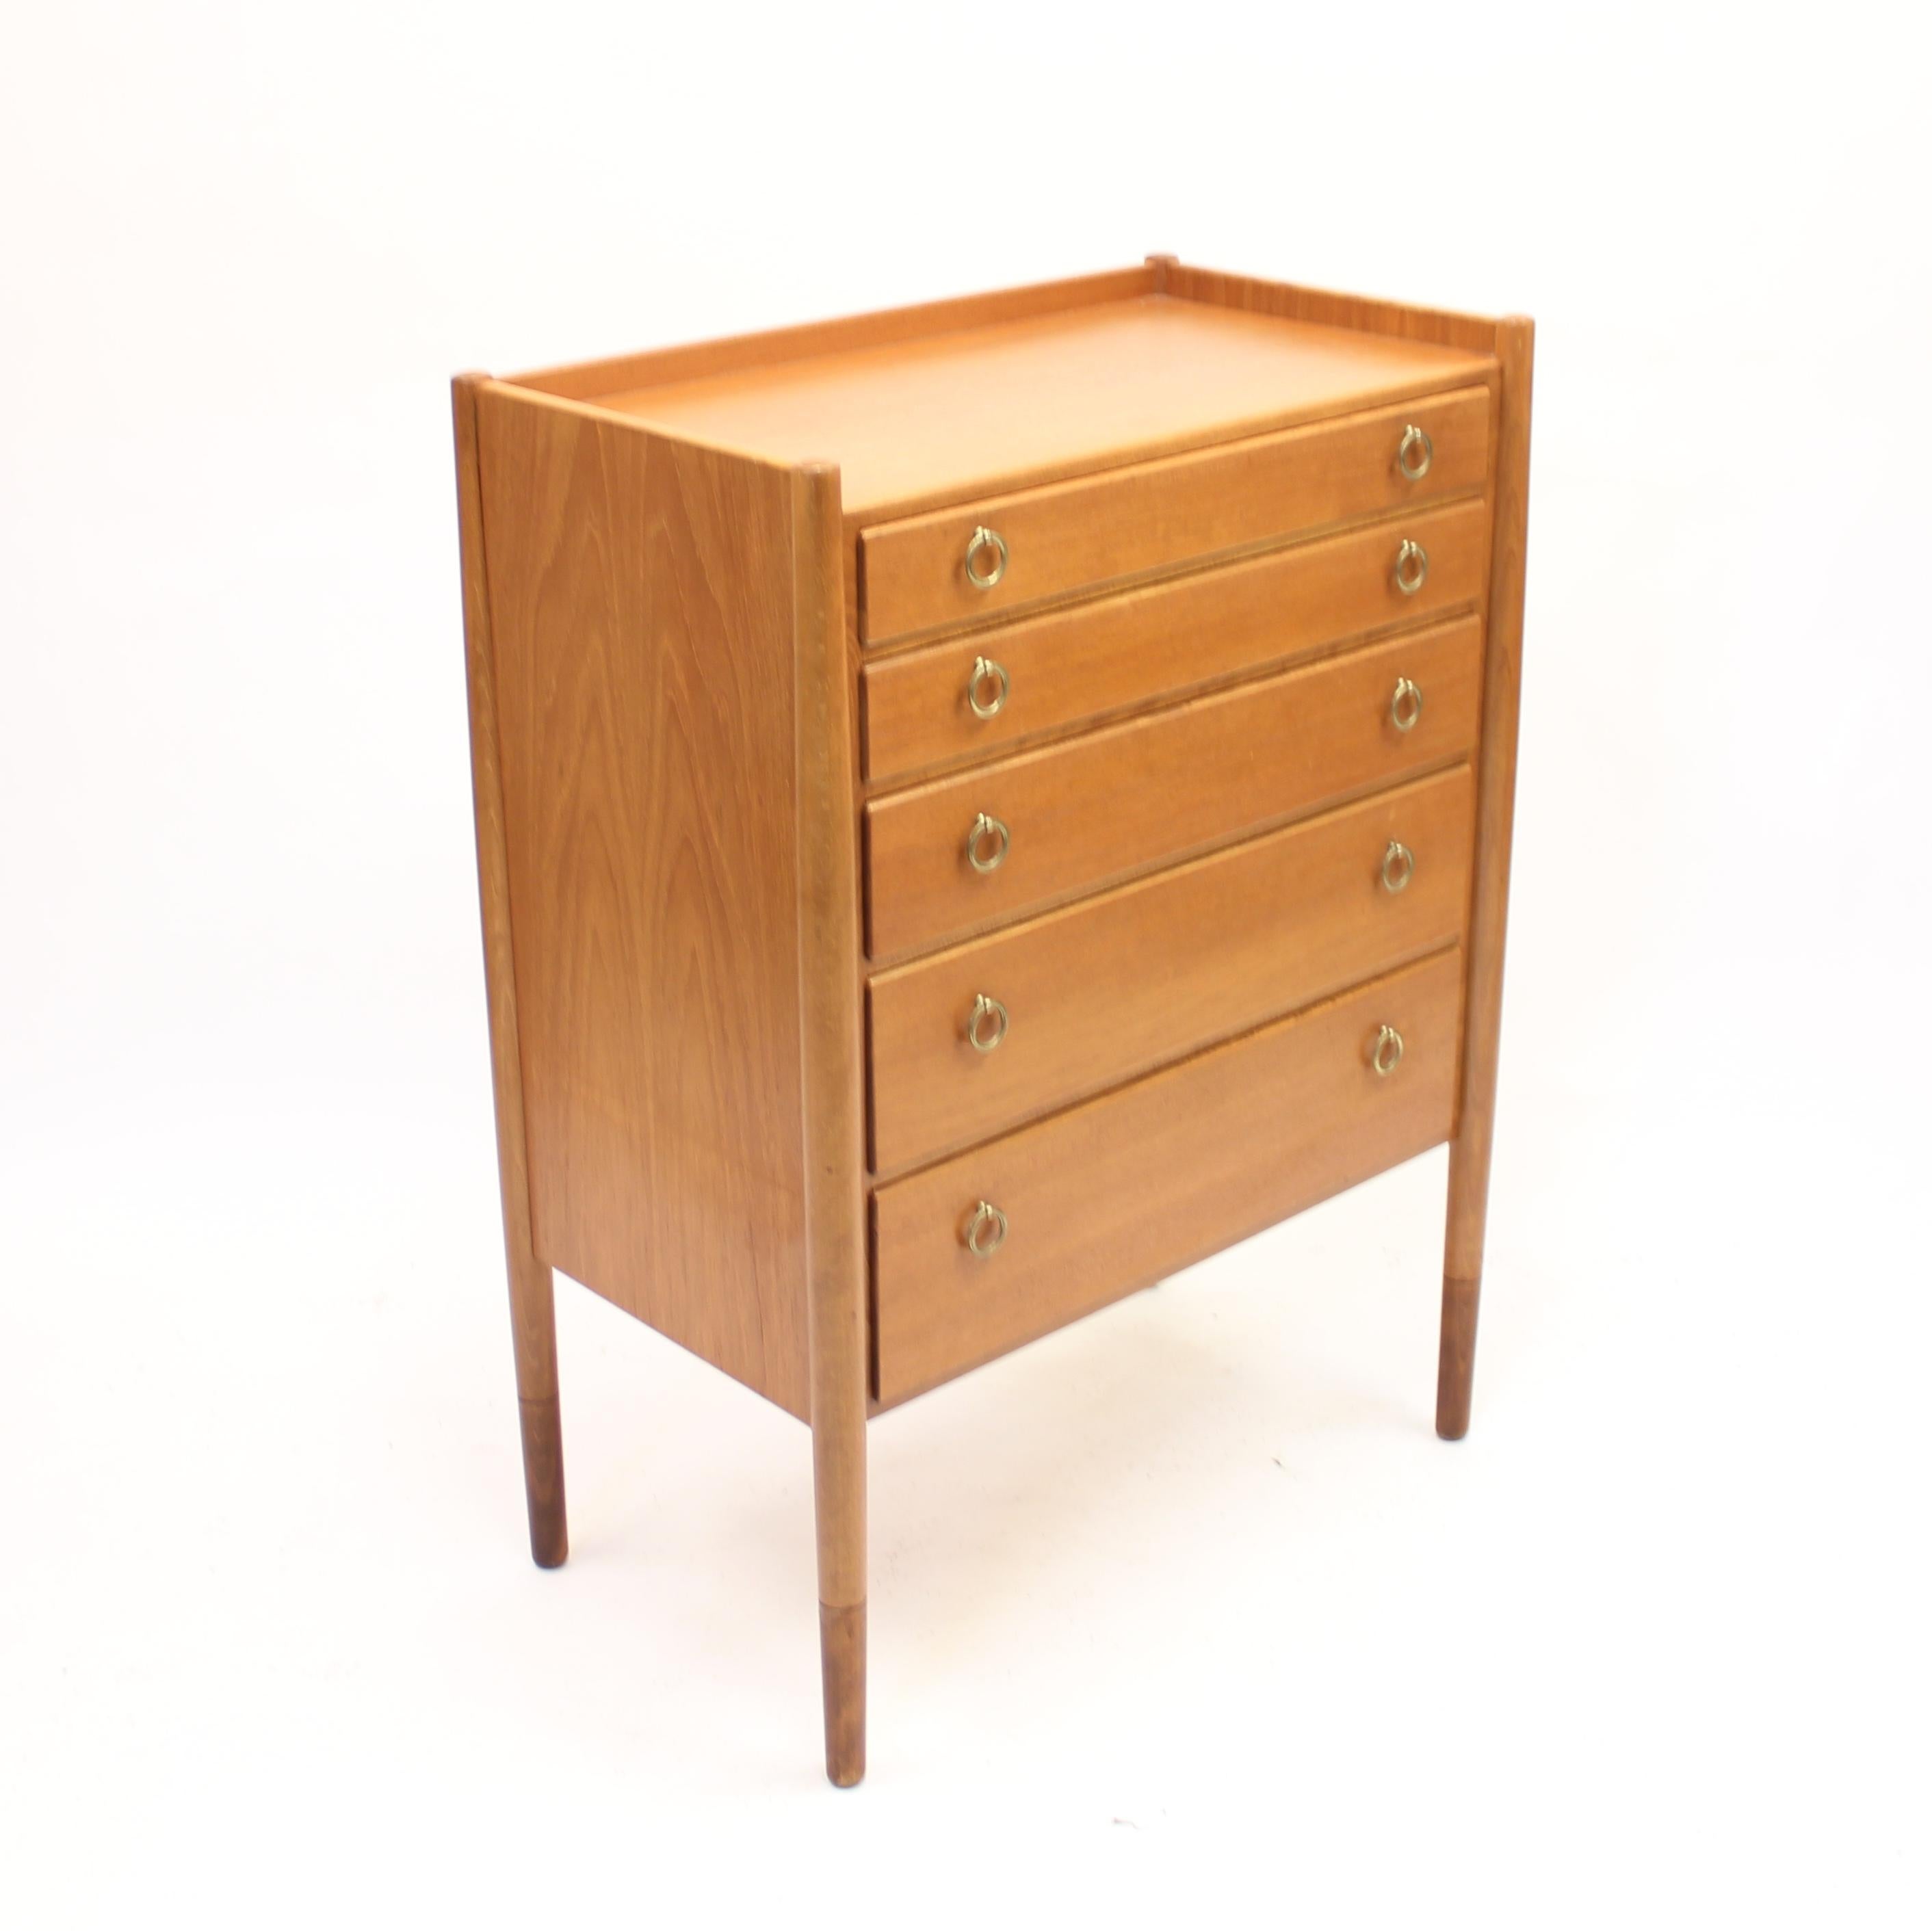 Swedish Mid-Century Teak Chest of Drawers by Treman, 1960s In Good Condition For Sale In Uppsala, SE